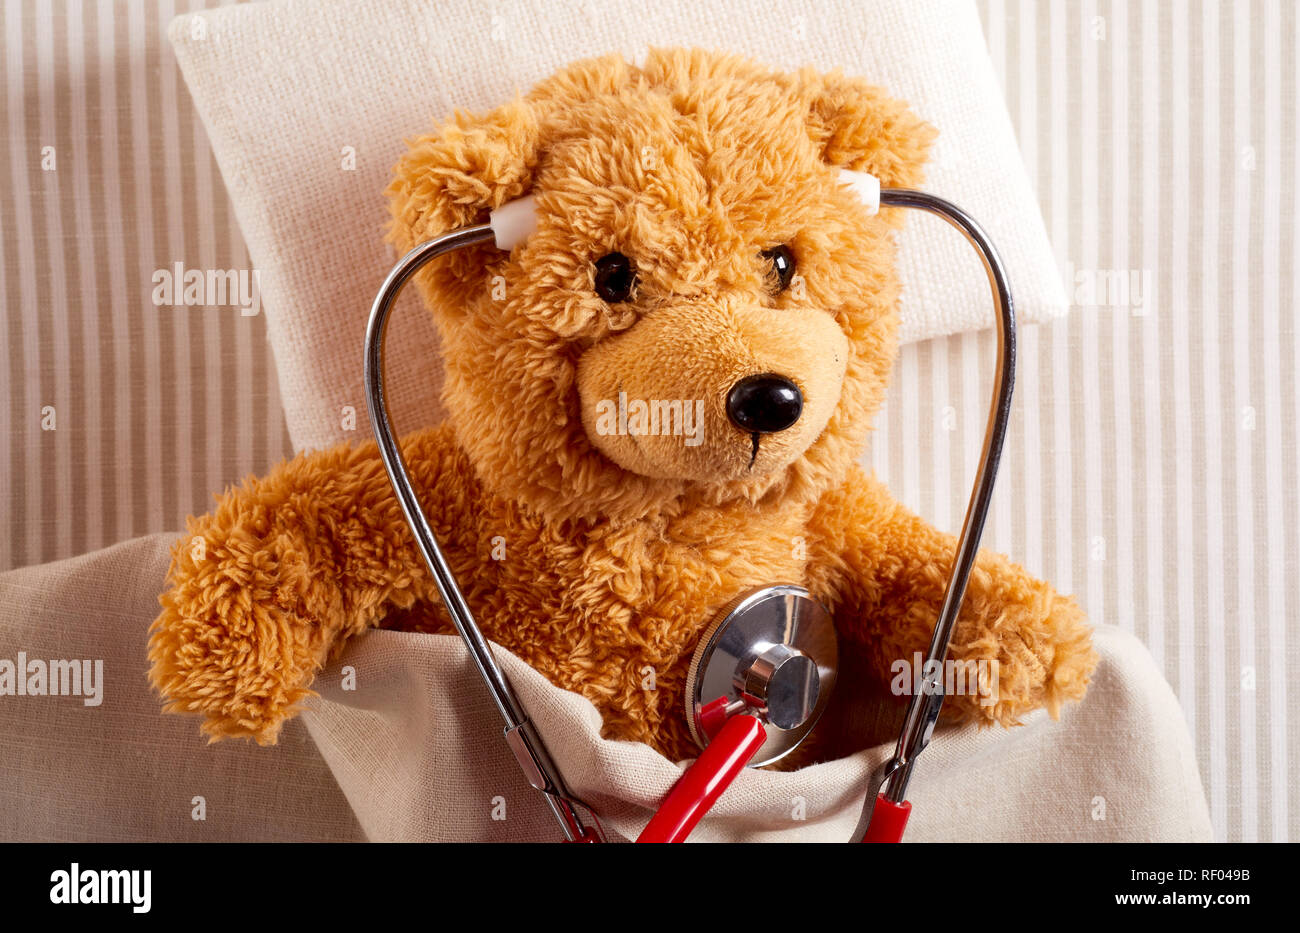 Cute little teddy bear using a stethoscope to listen to its hear as it lies in a hospital bed in a concept of paediatric healthcare Stock Photo